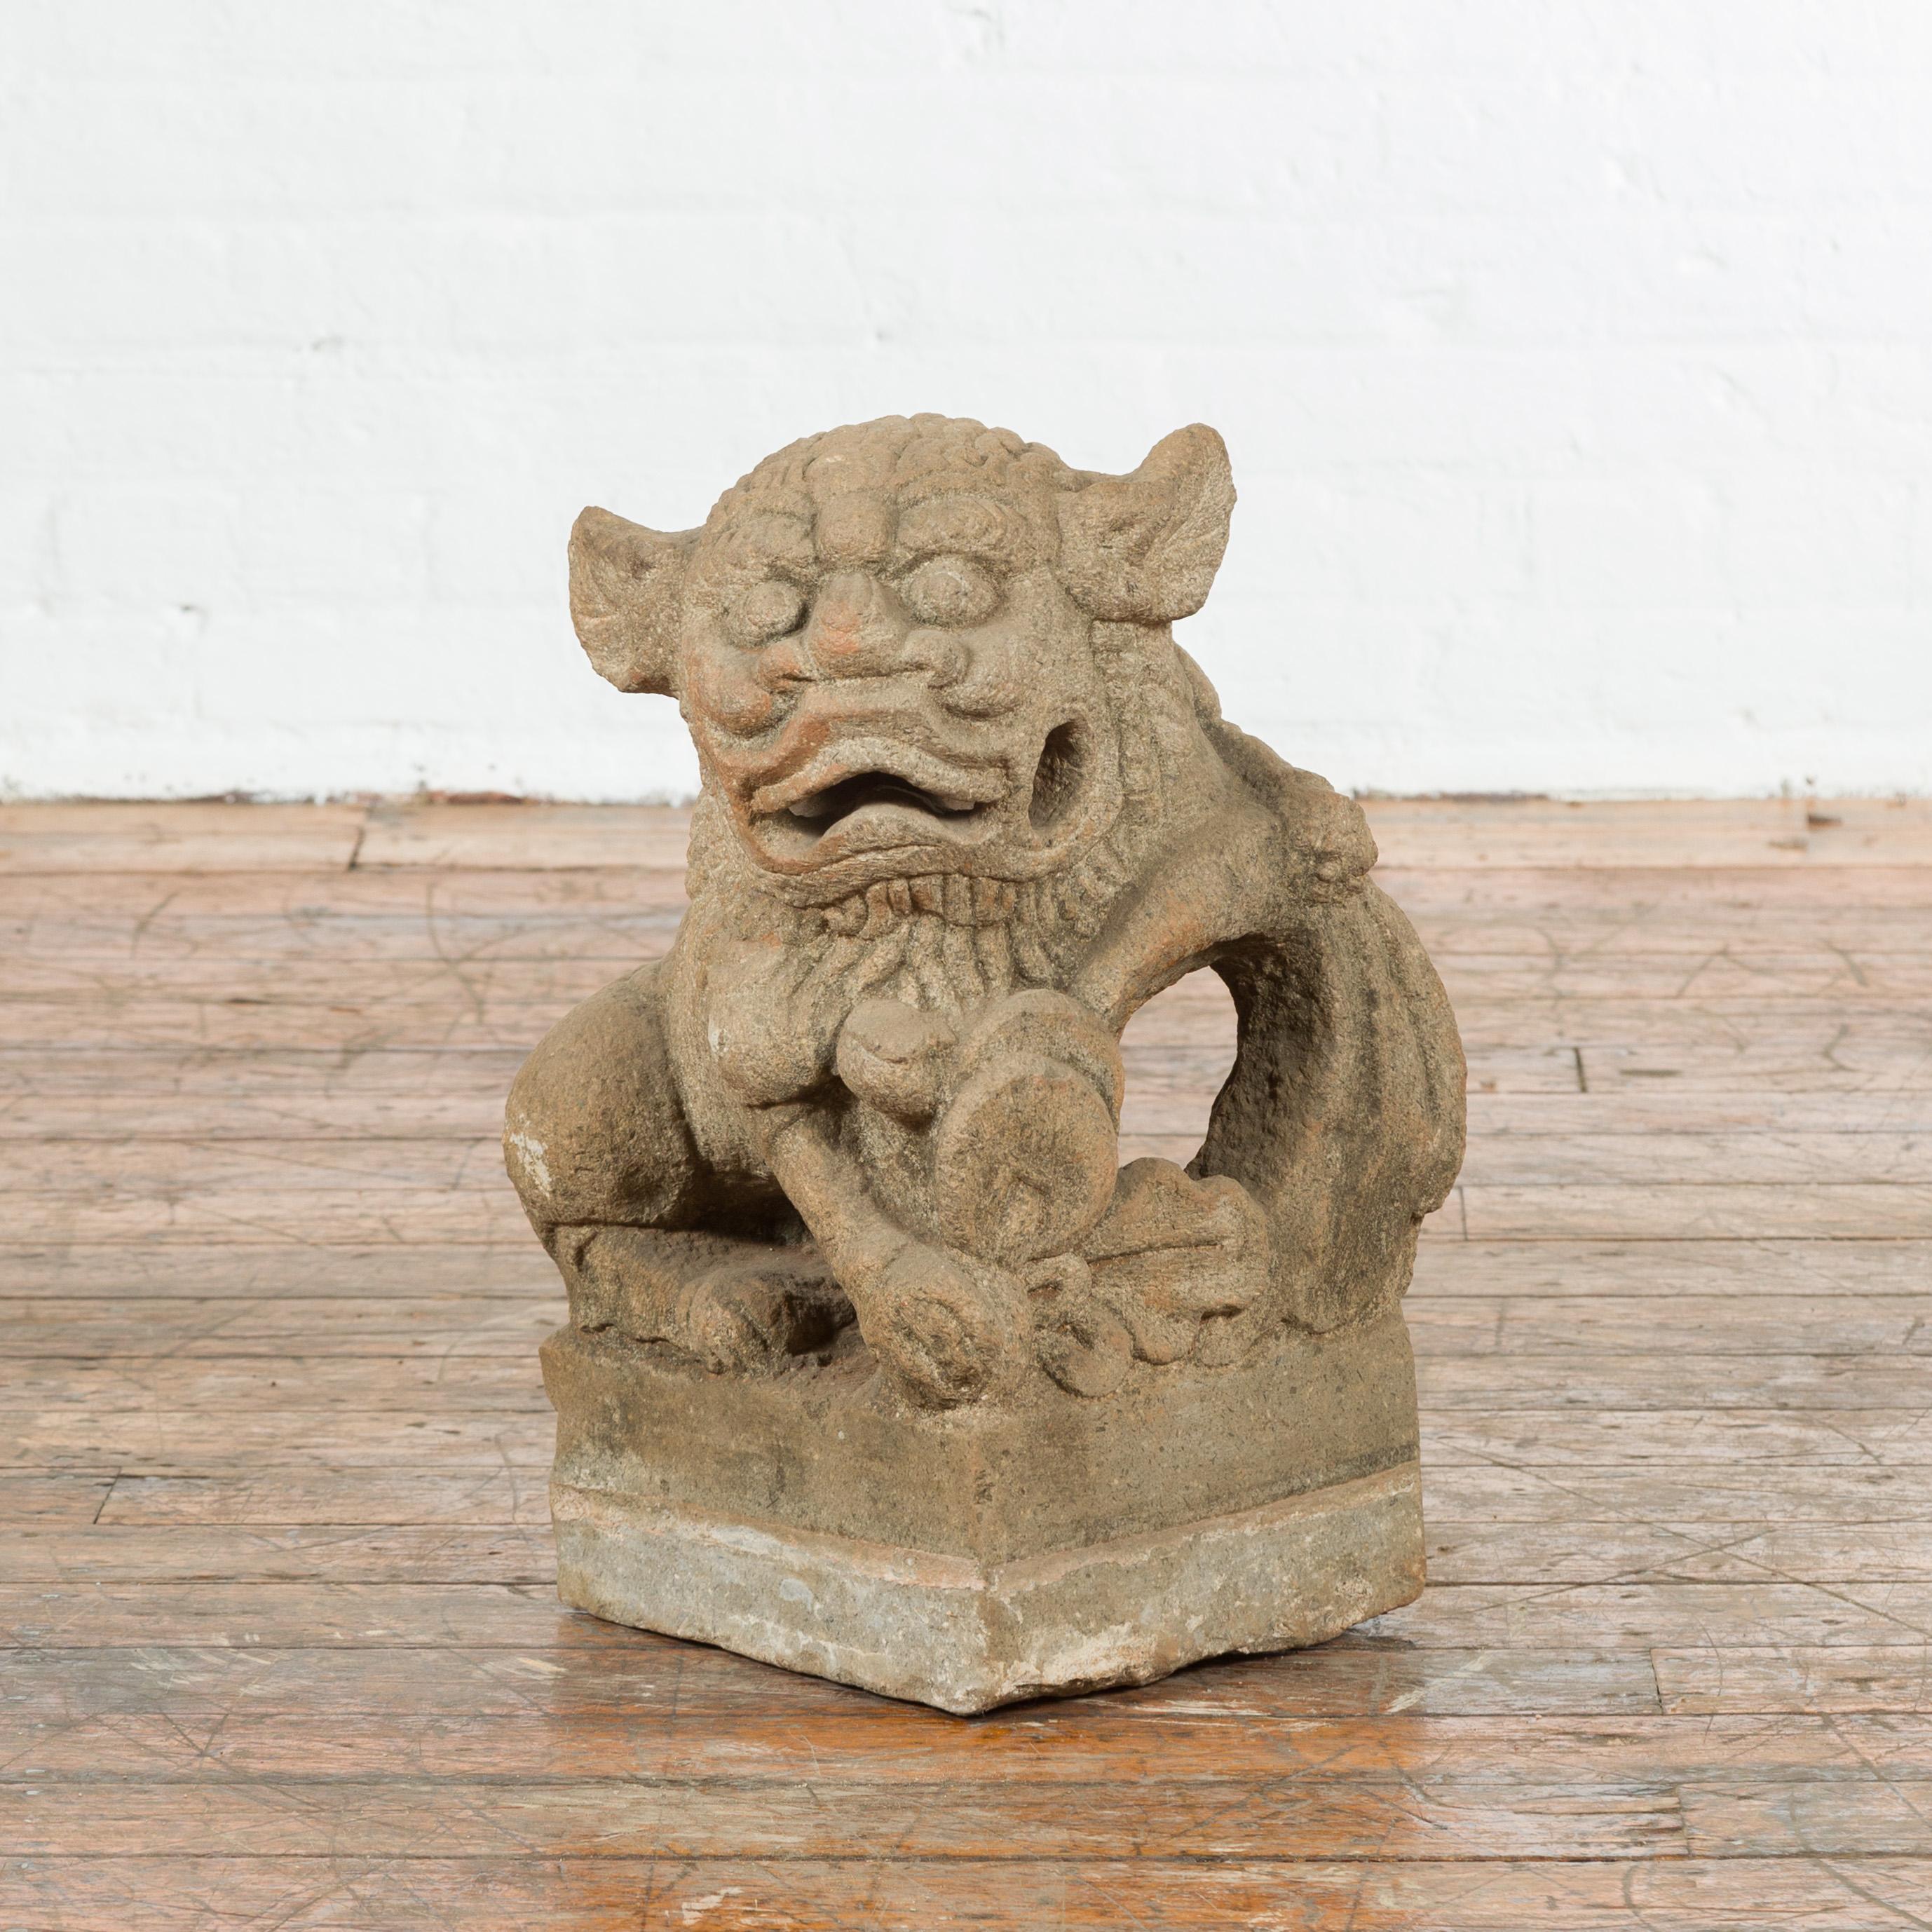 Chinese Qing Dynasty 19th Century Carved Stone Foo Dog Guardian Lion Sculpture For Sale 5